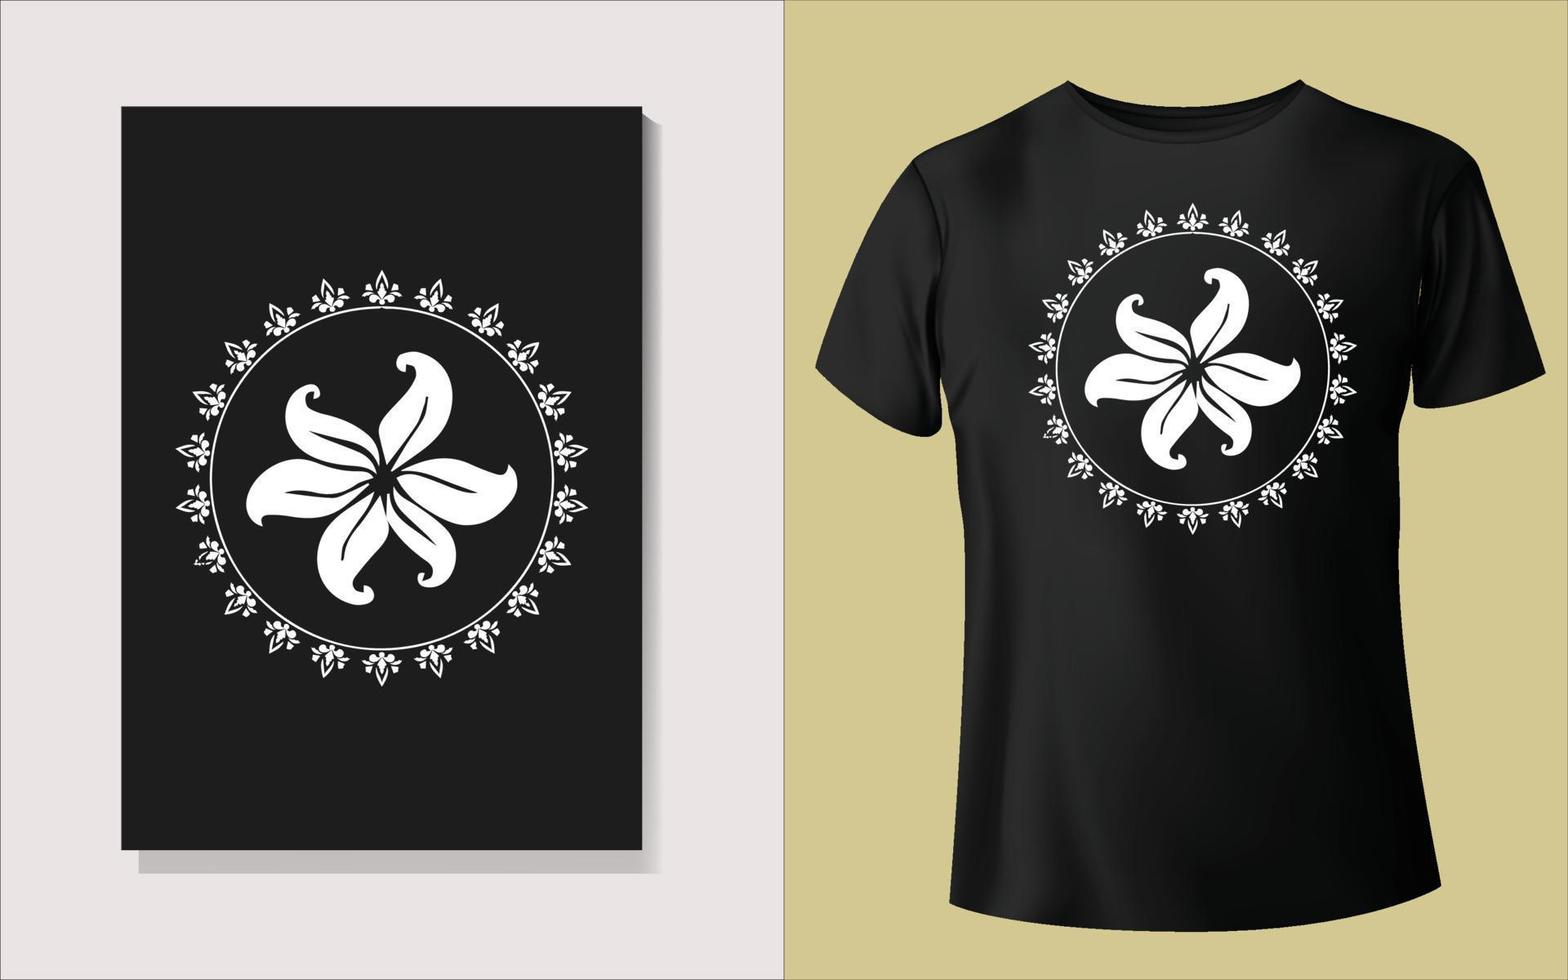 Black and white tee shirt design vector